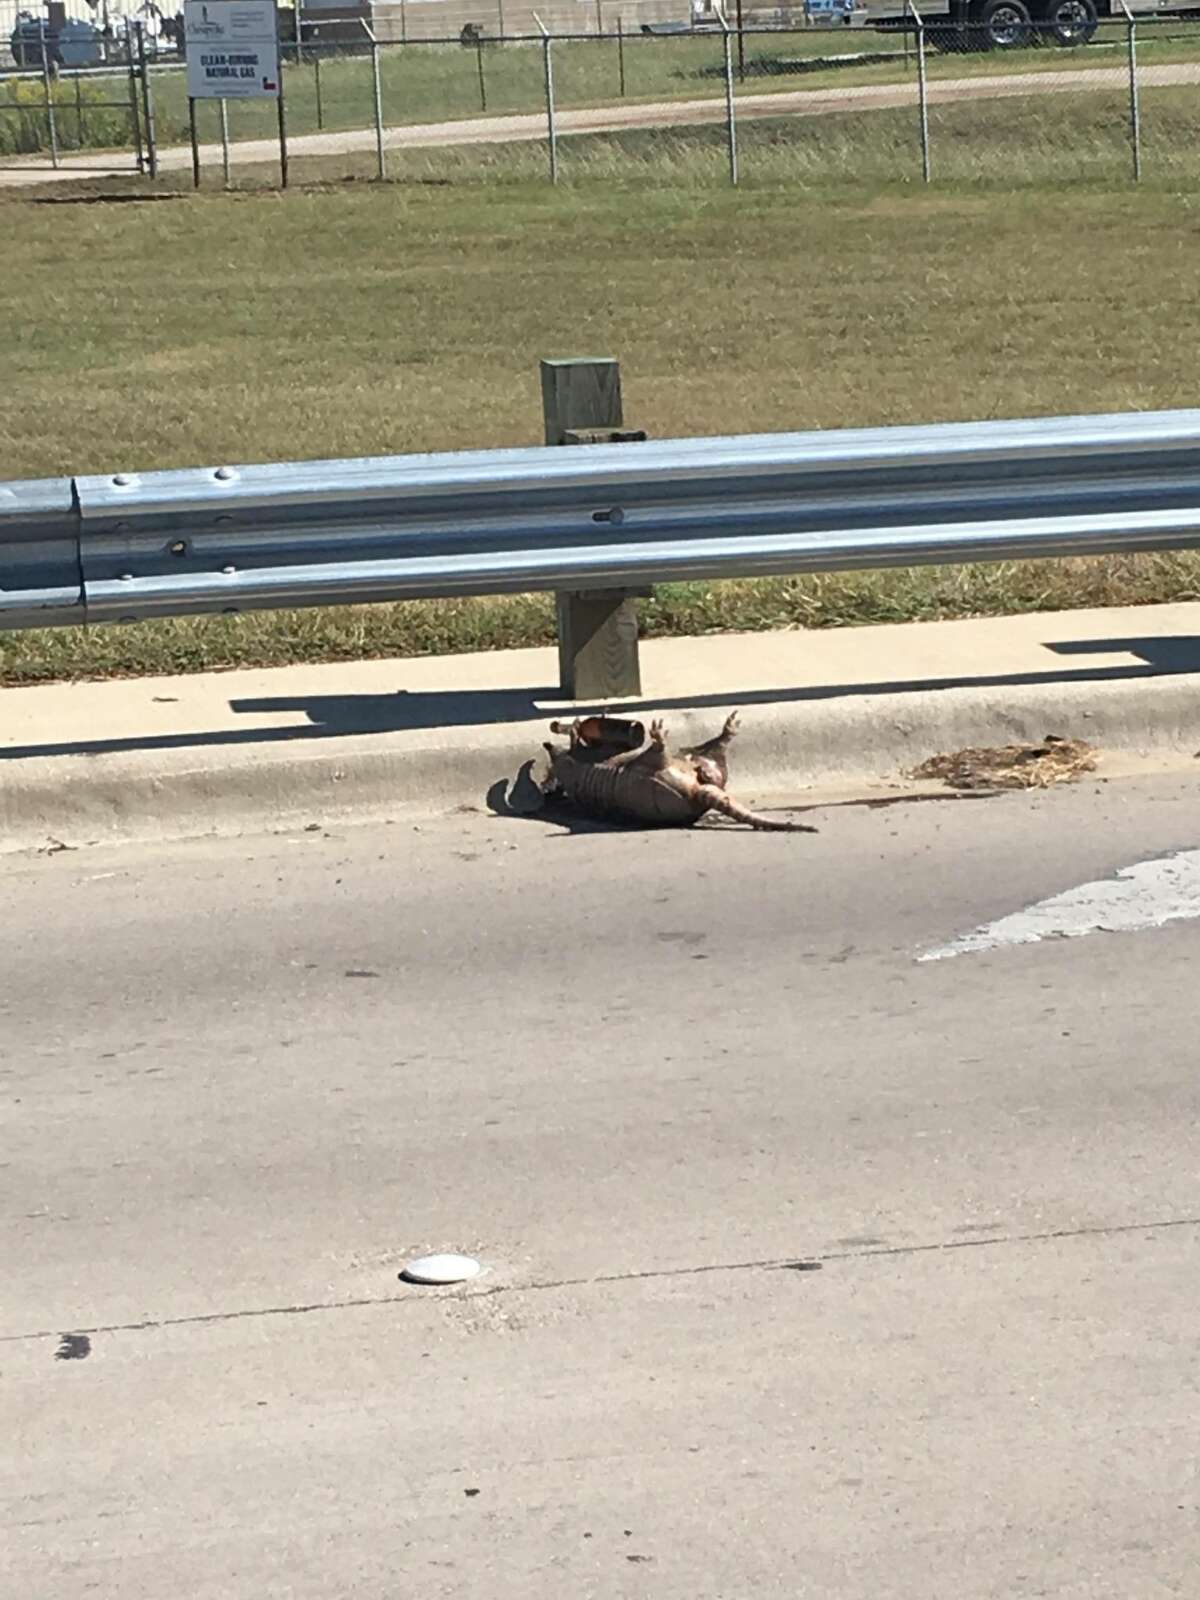 The latest photo of a dead armadillo holding a beer was taken last weekend in Burleson, TX.